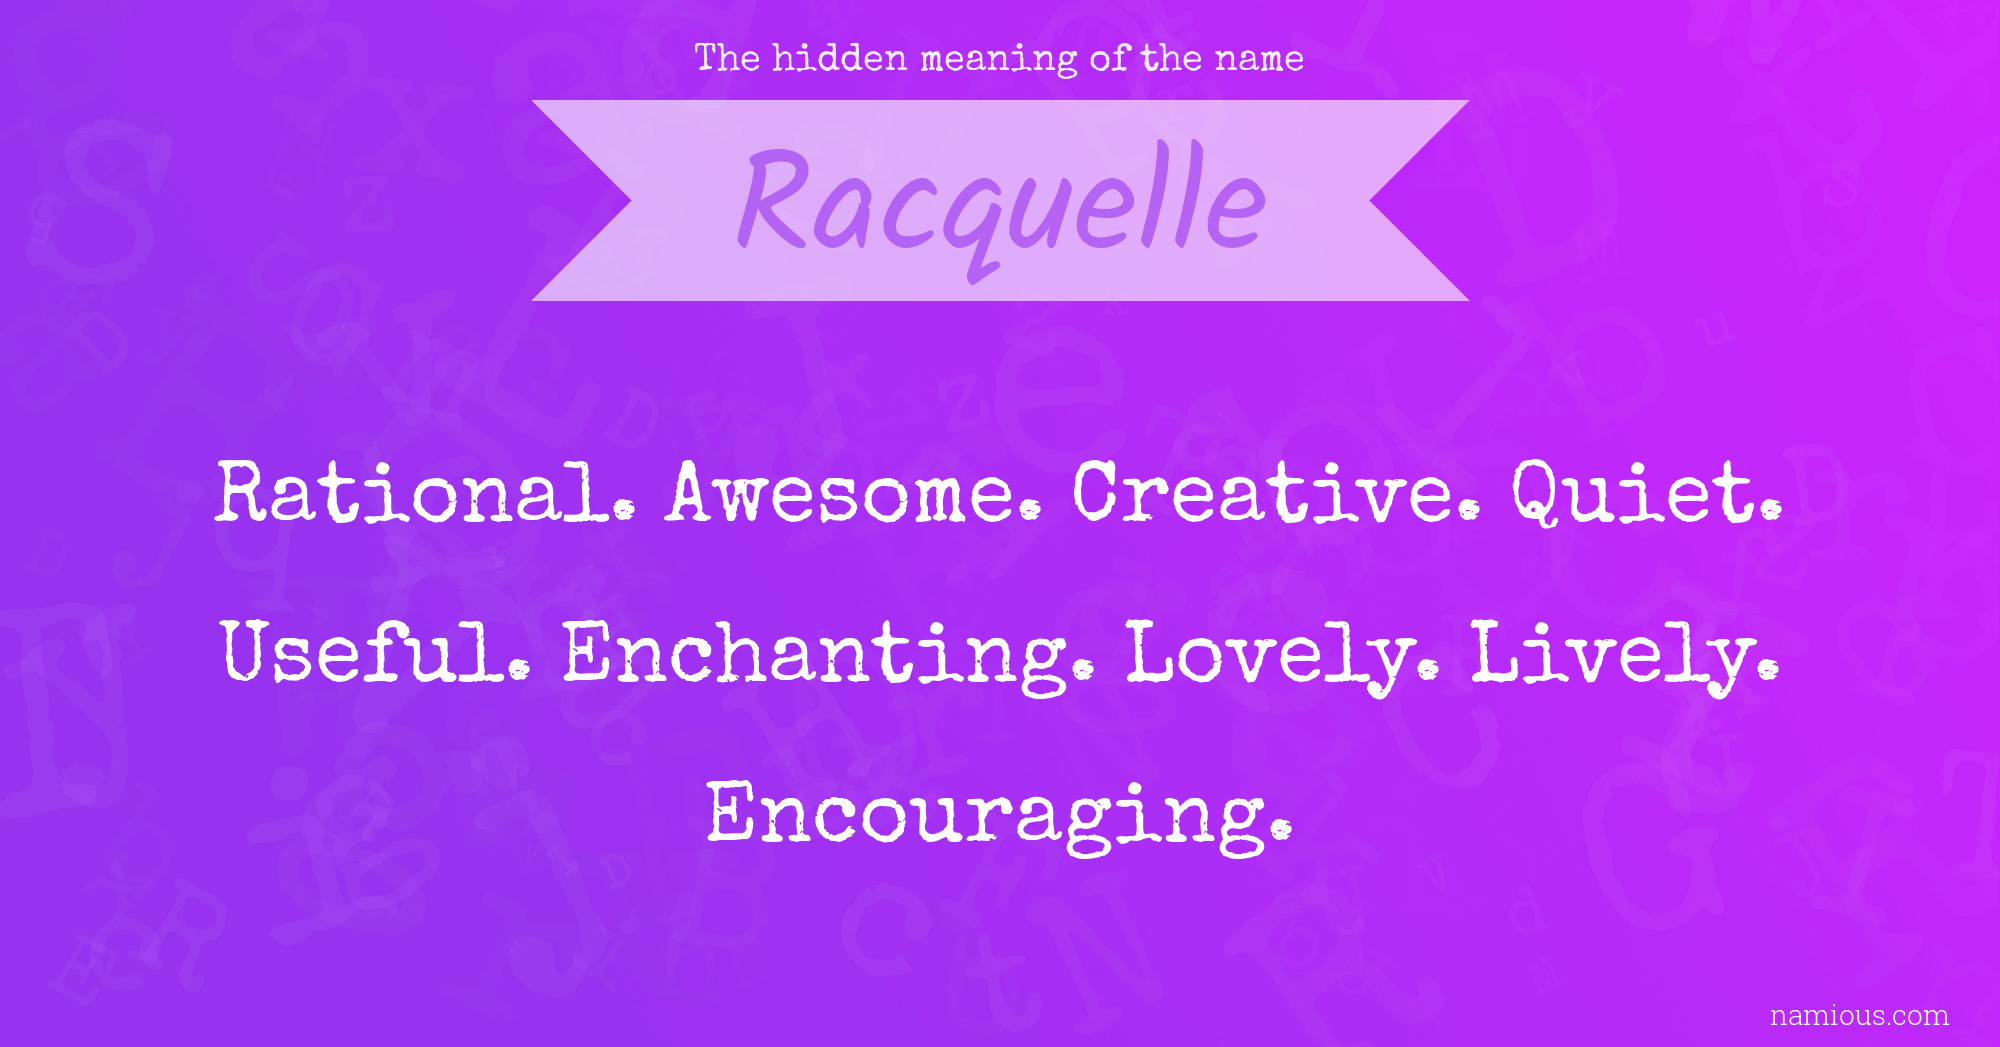 The hidden meaning of the name Racquelle